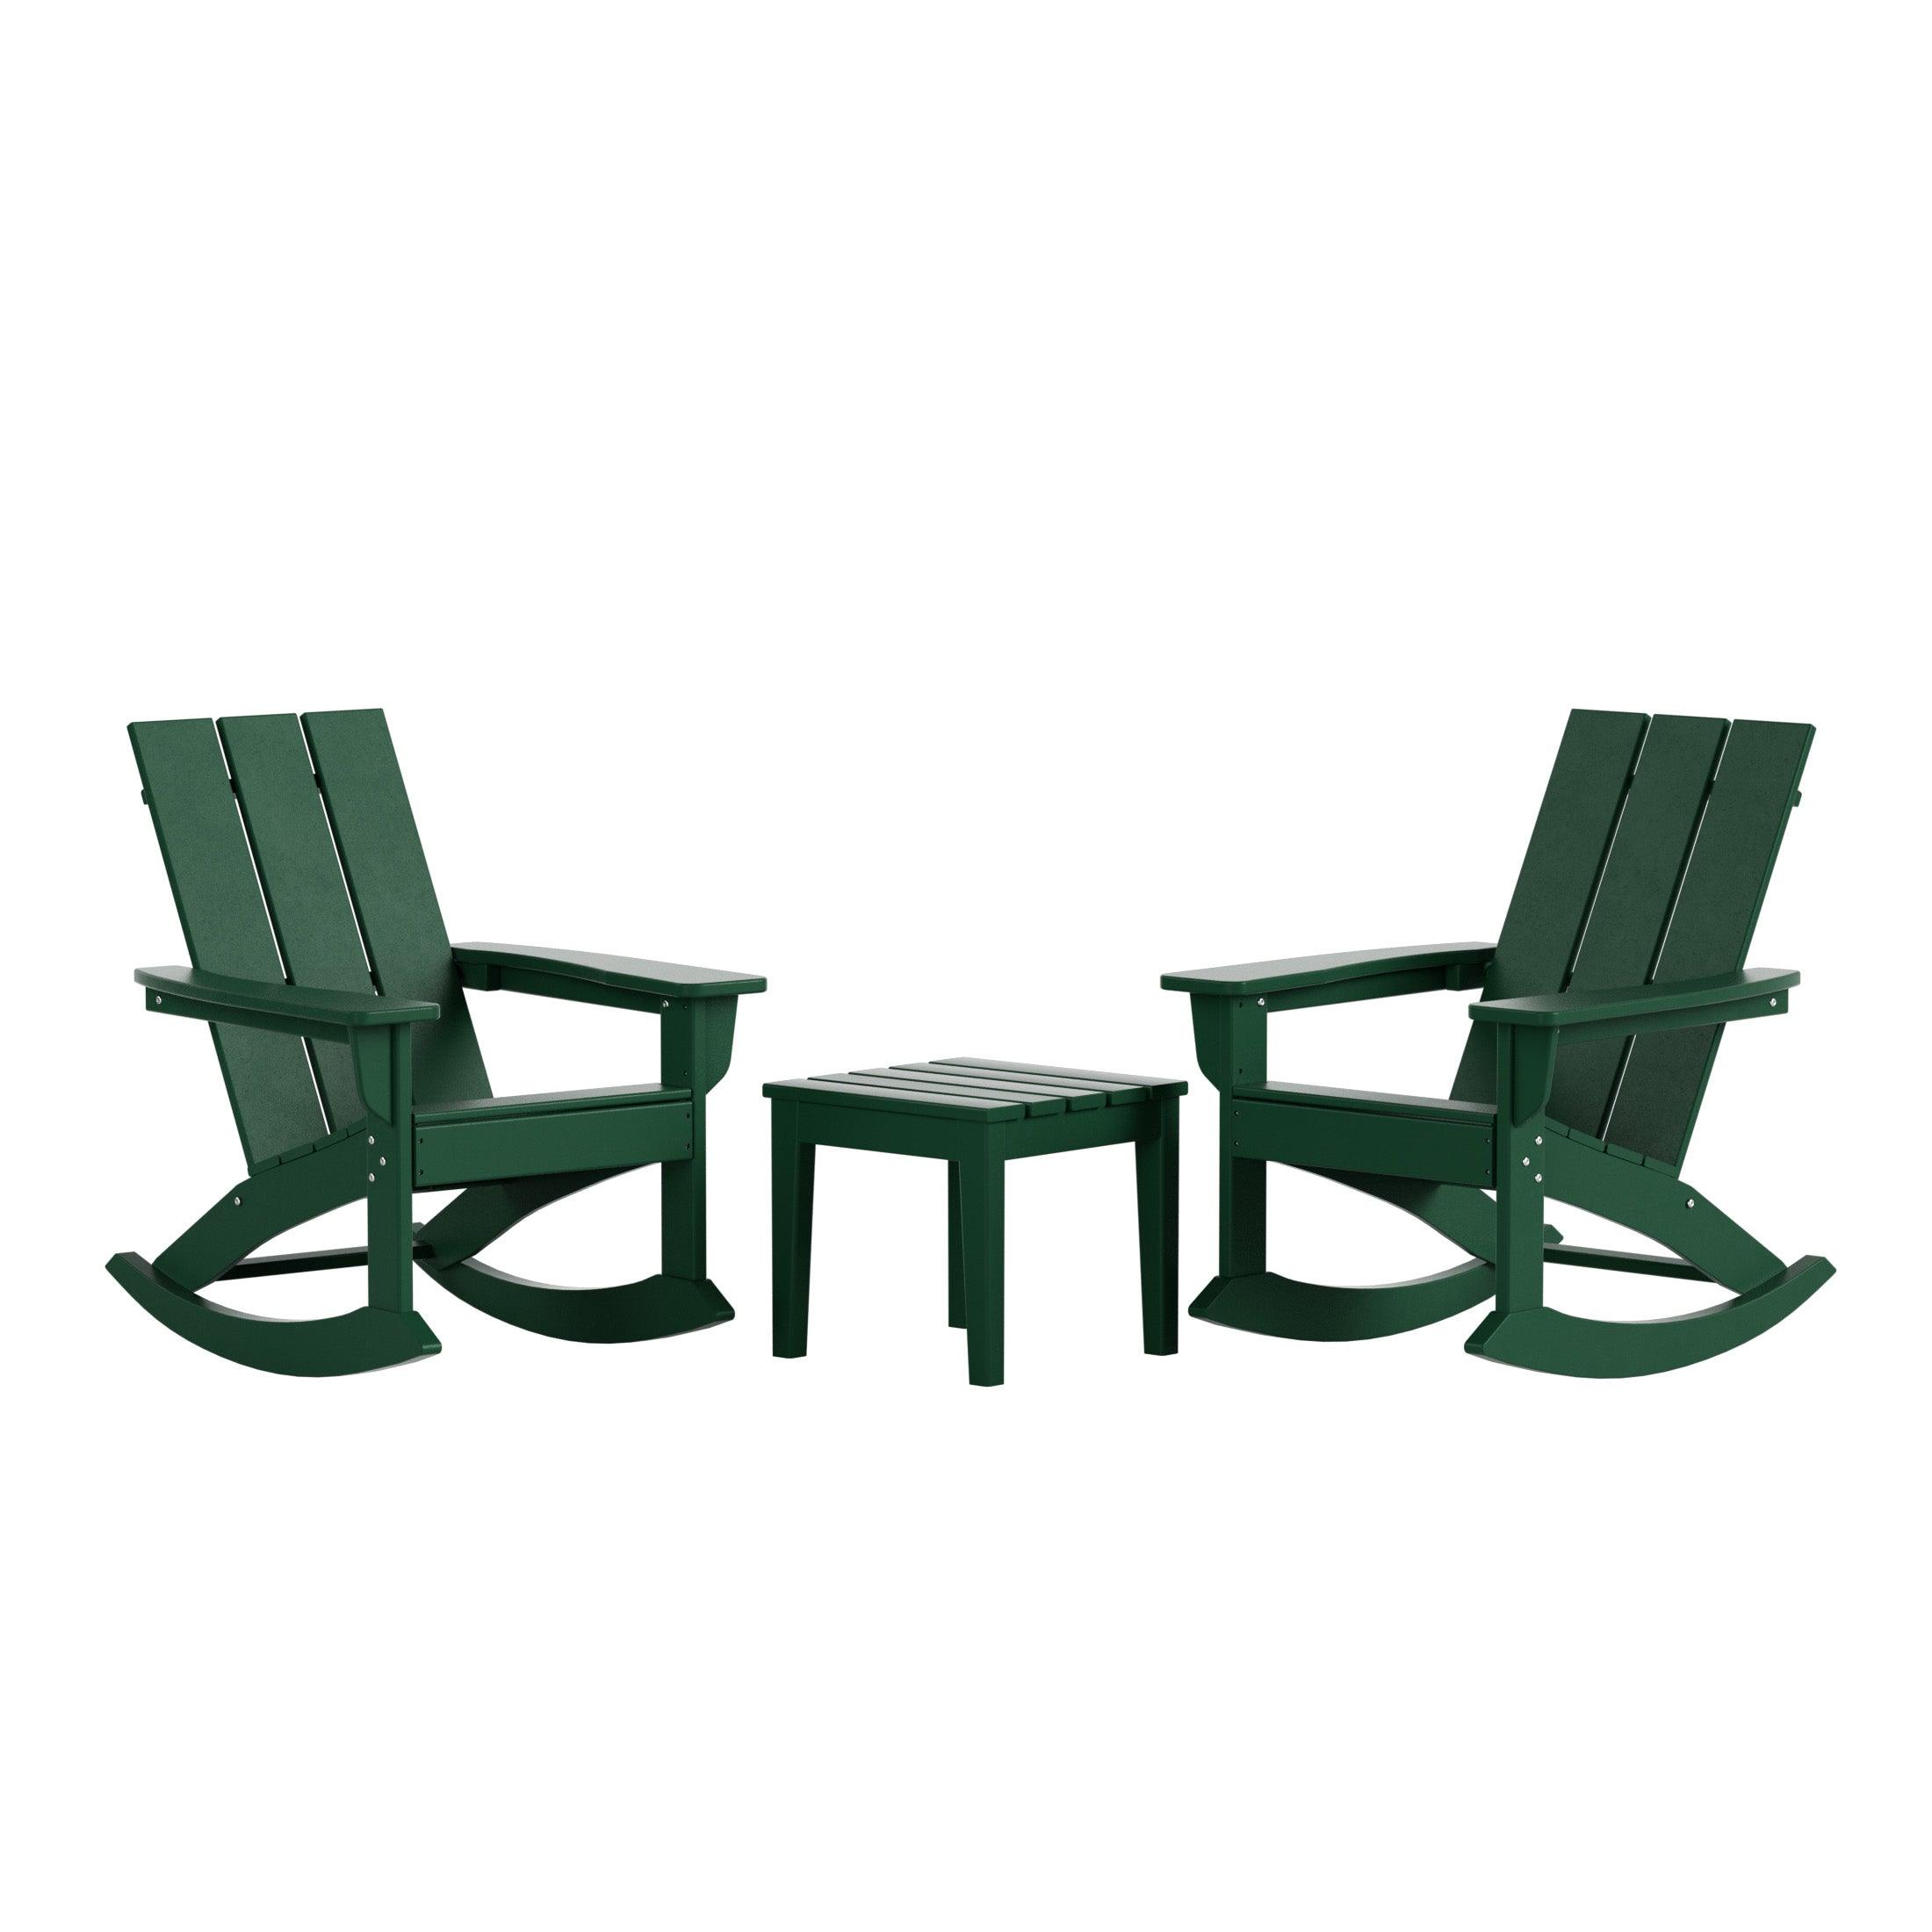 Palms 3 Piece Modern Adirondack Rocking Chair with Side Table Set - Costaelm